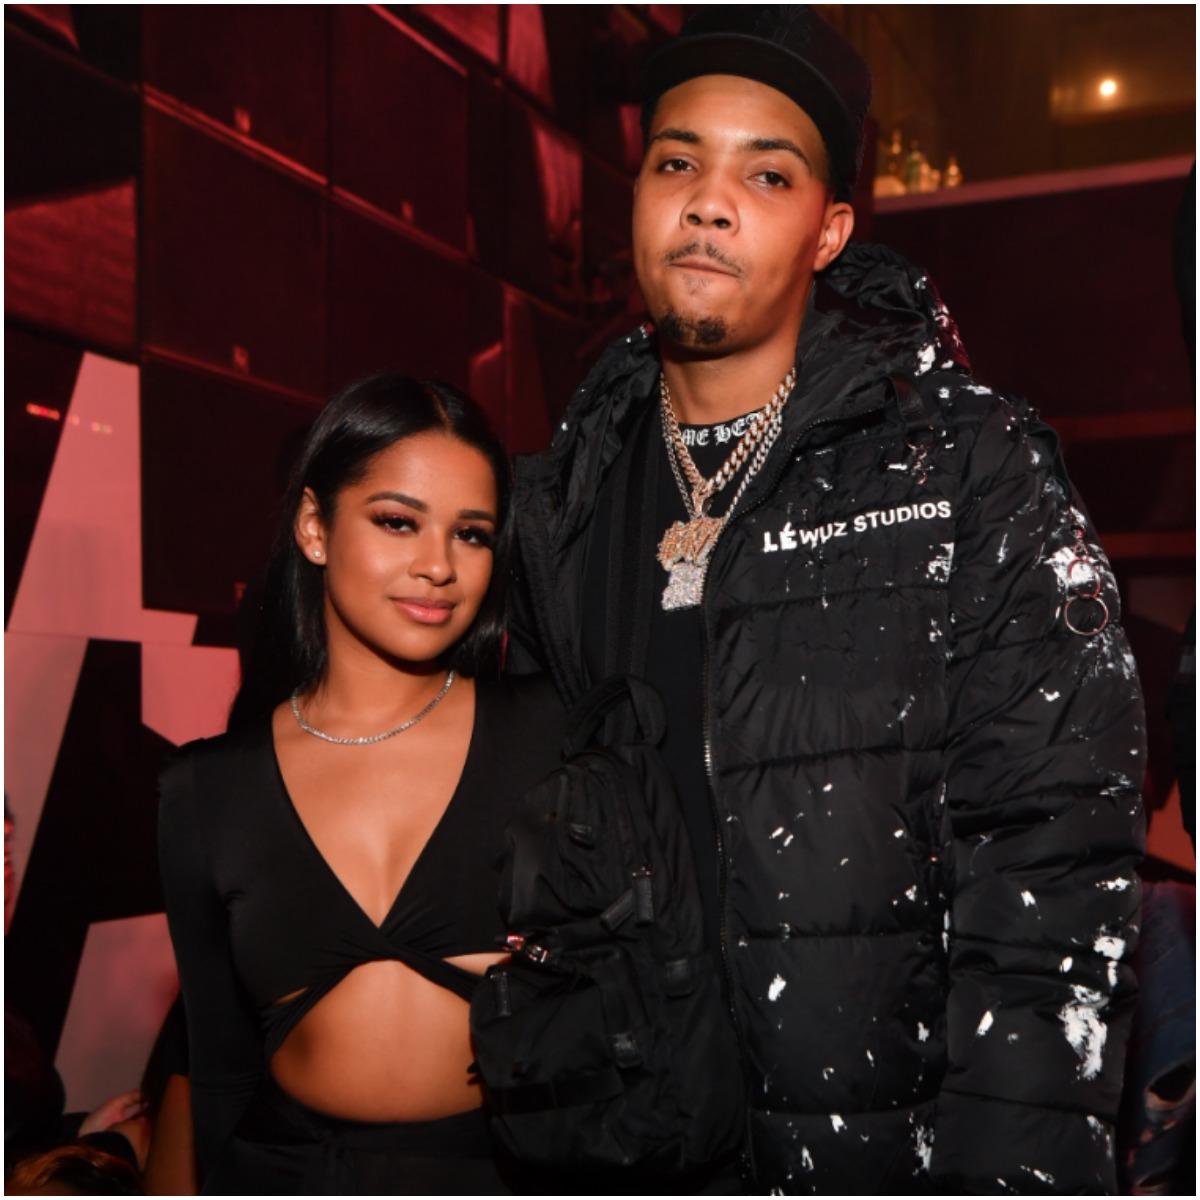 G Herbo with his girlfriend Taina Williams